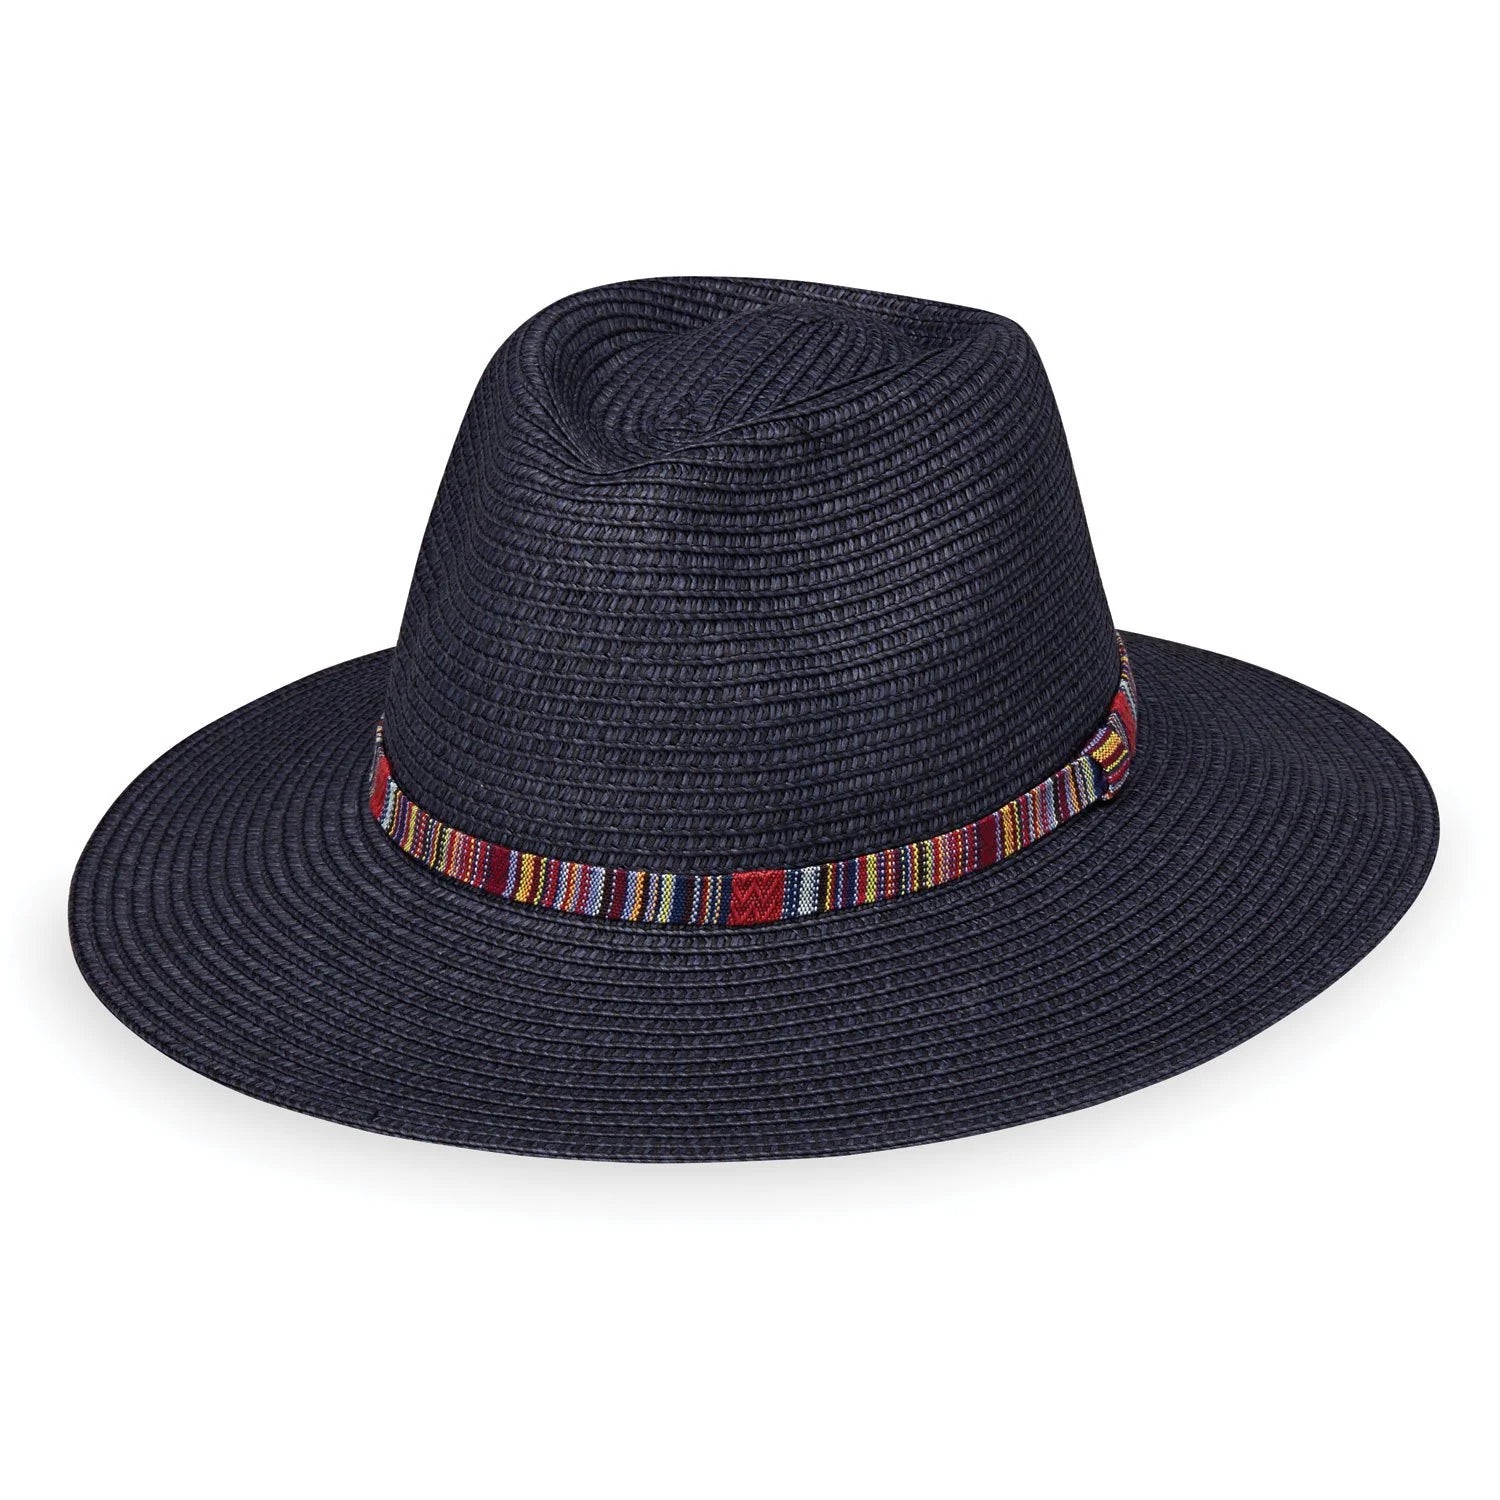 The multicolour, embroidered band gives the Sedona sun hat its distinctive style. The structured brim provides significant shade and sun protection for carefree days outdoors. Its packable construction folds up for travel.